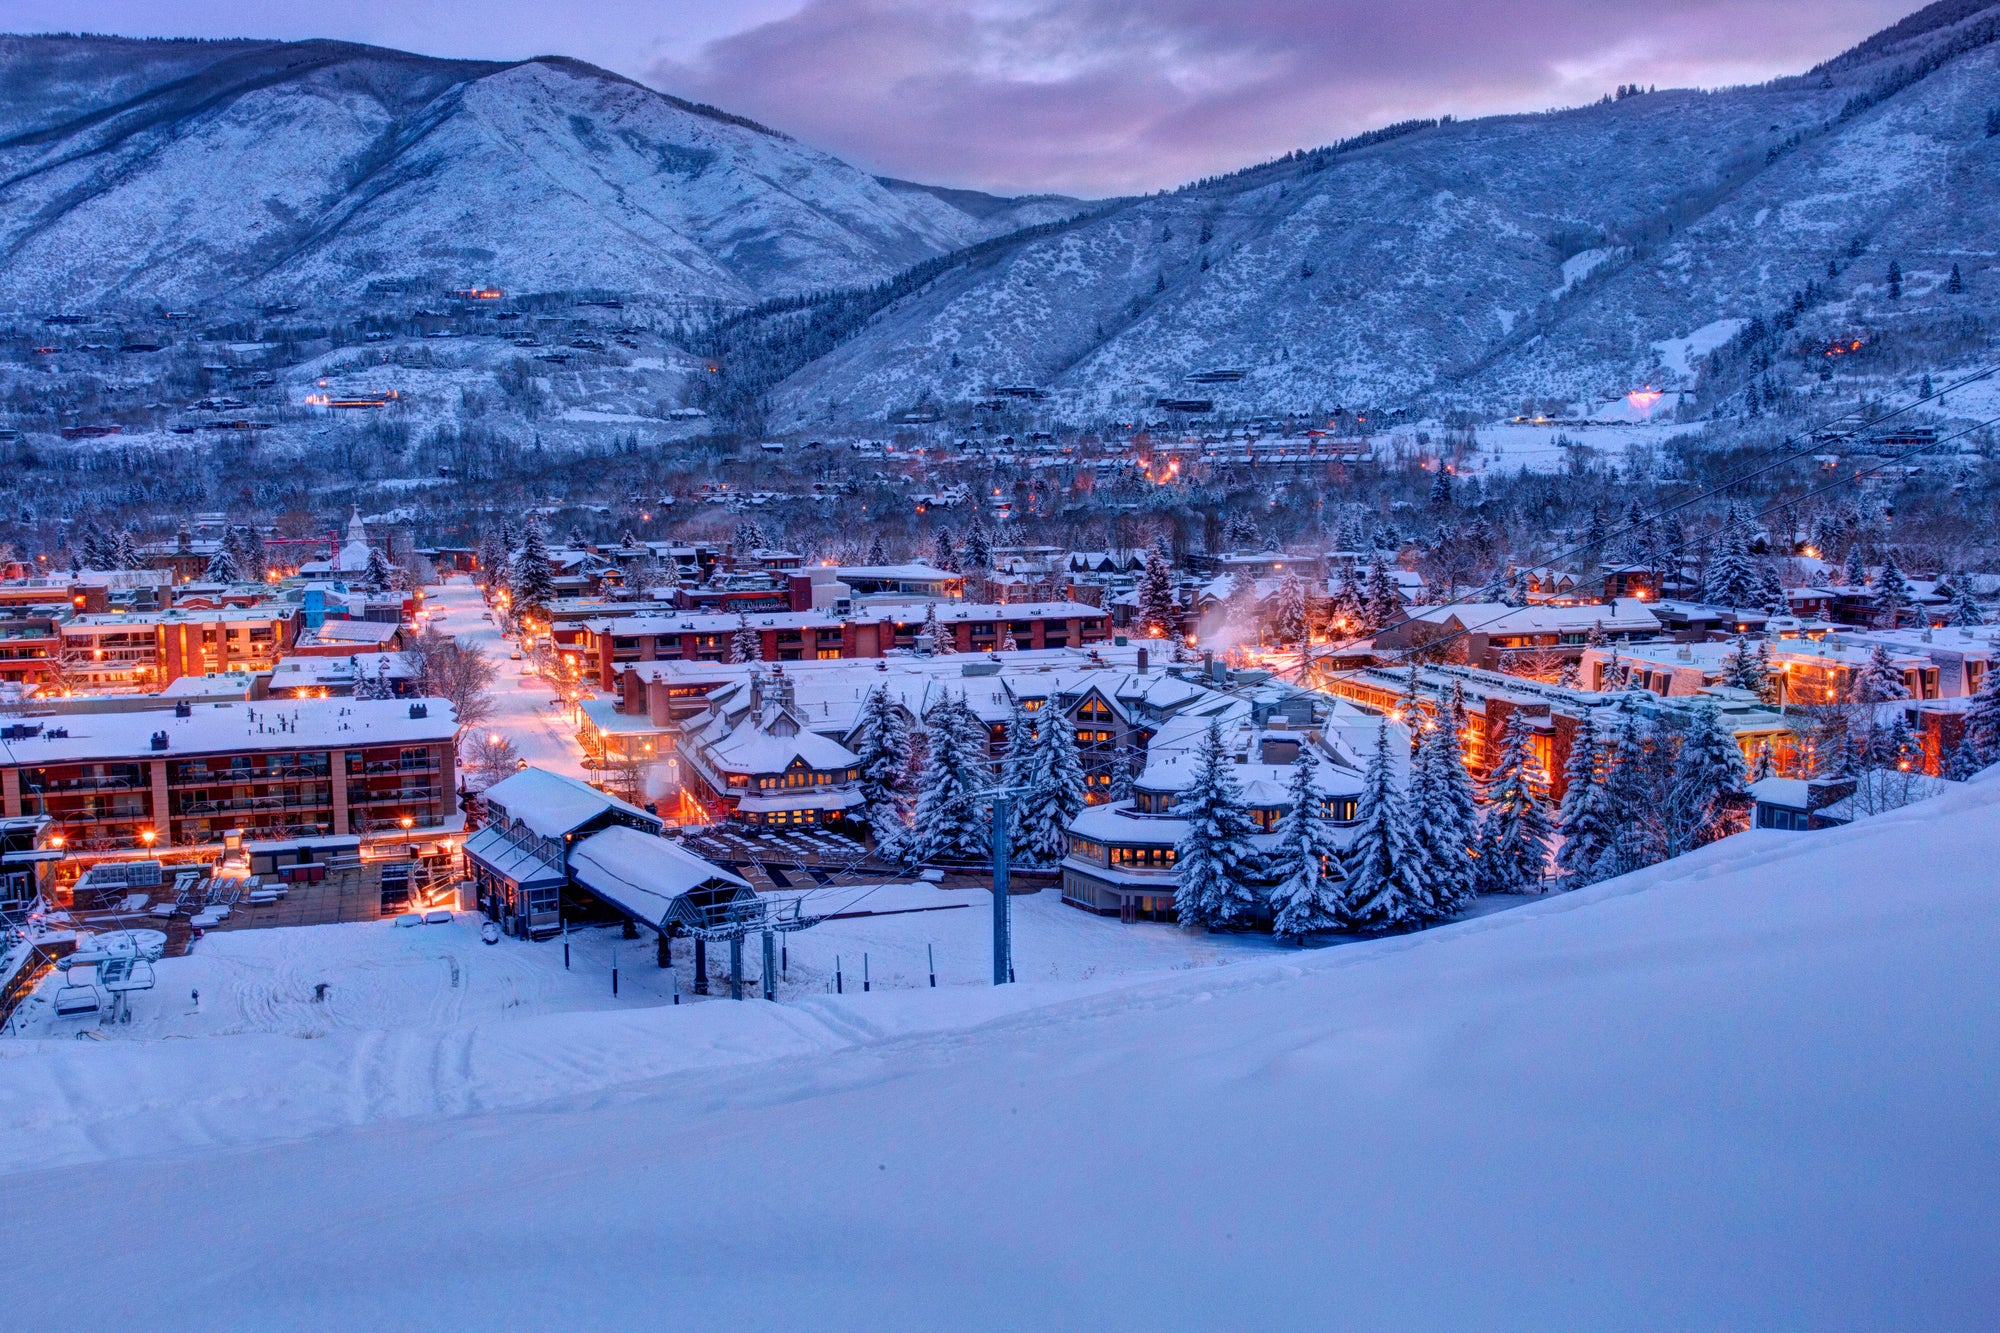 The Best US Ski Resort Hotels to Check Into this Winter